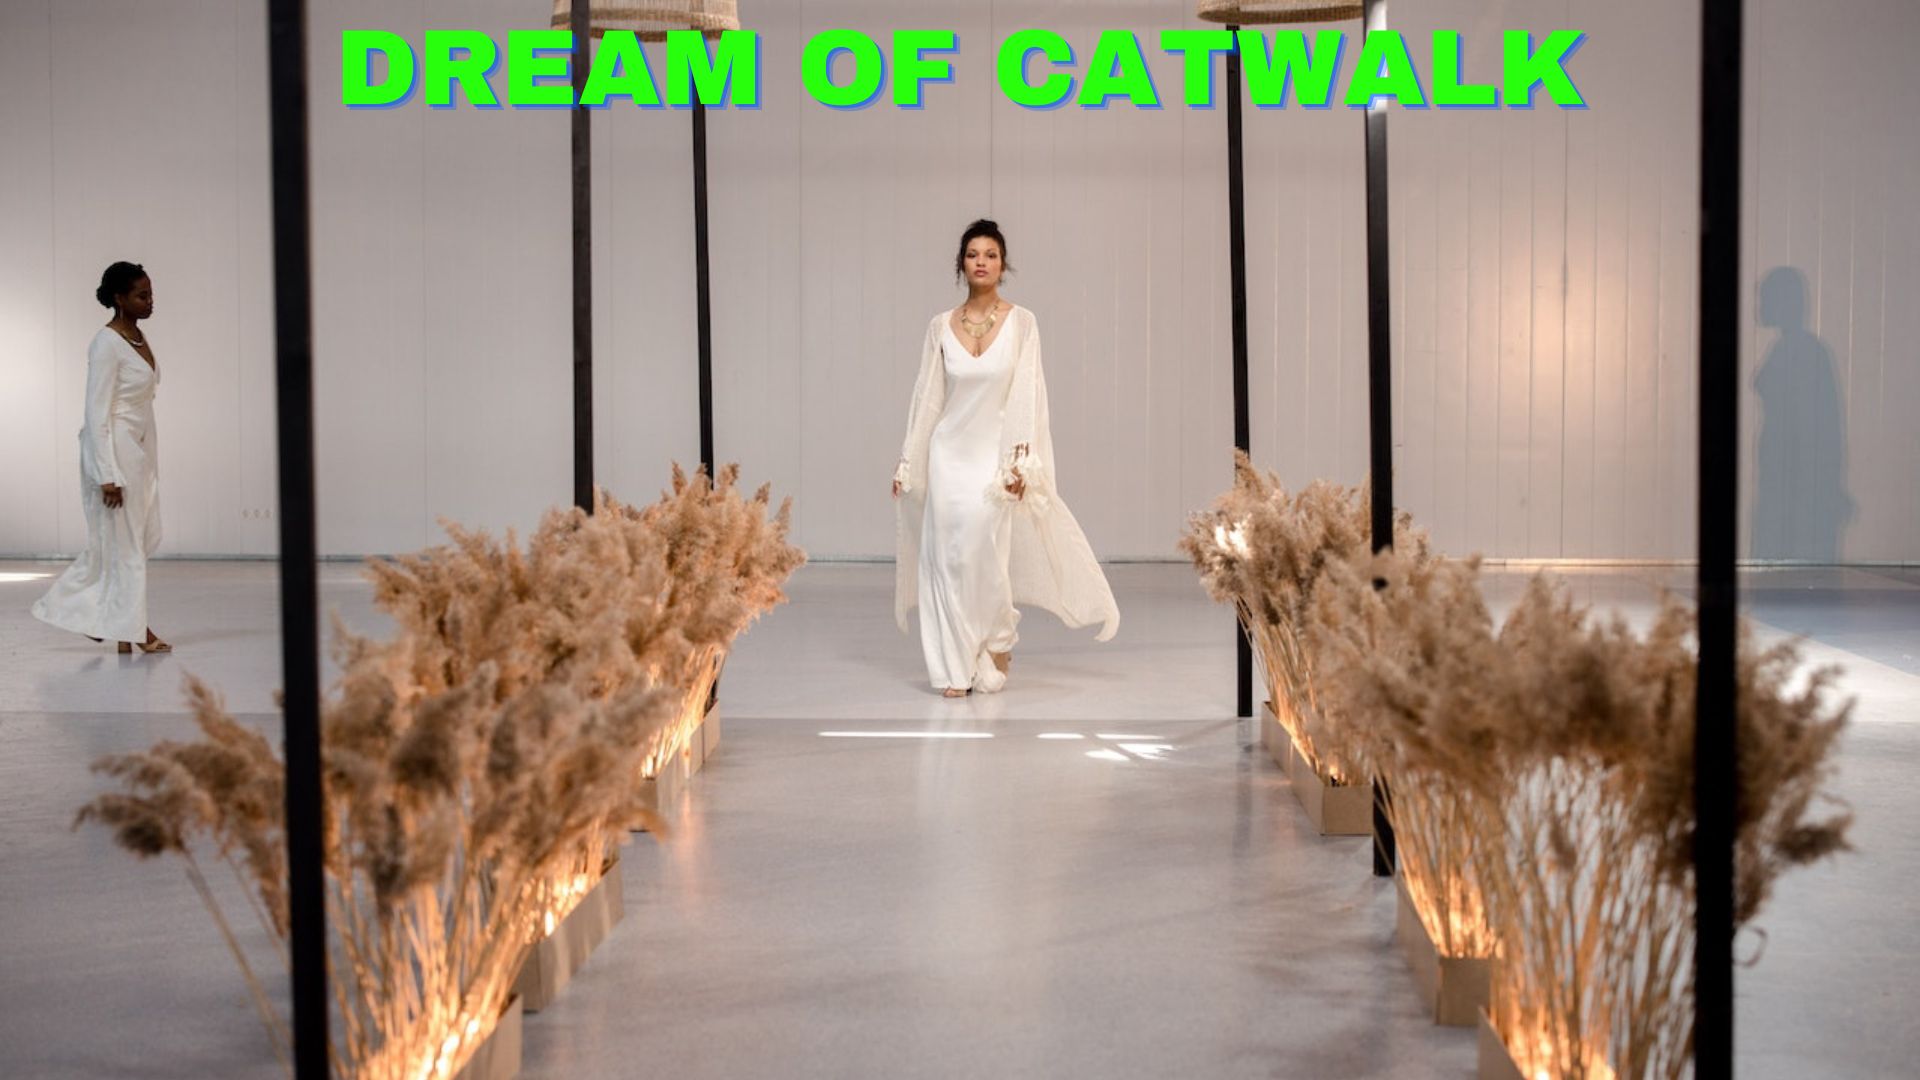 Dream Of Catwalk - Displays Of Confidence To Others